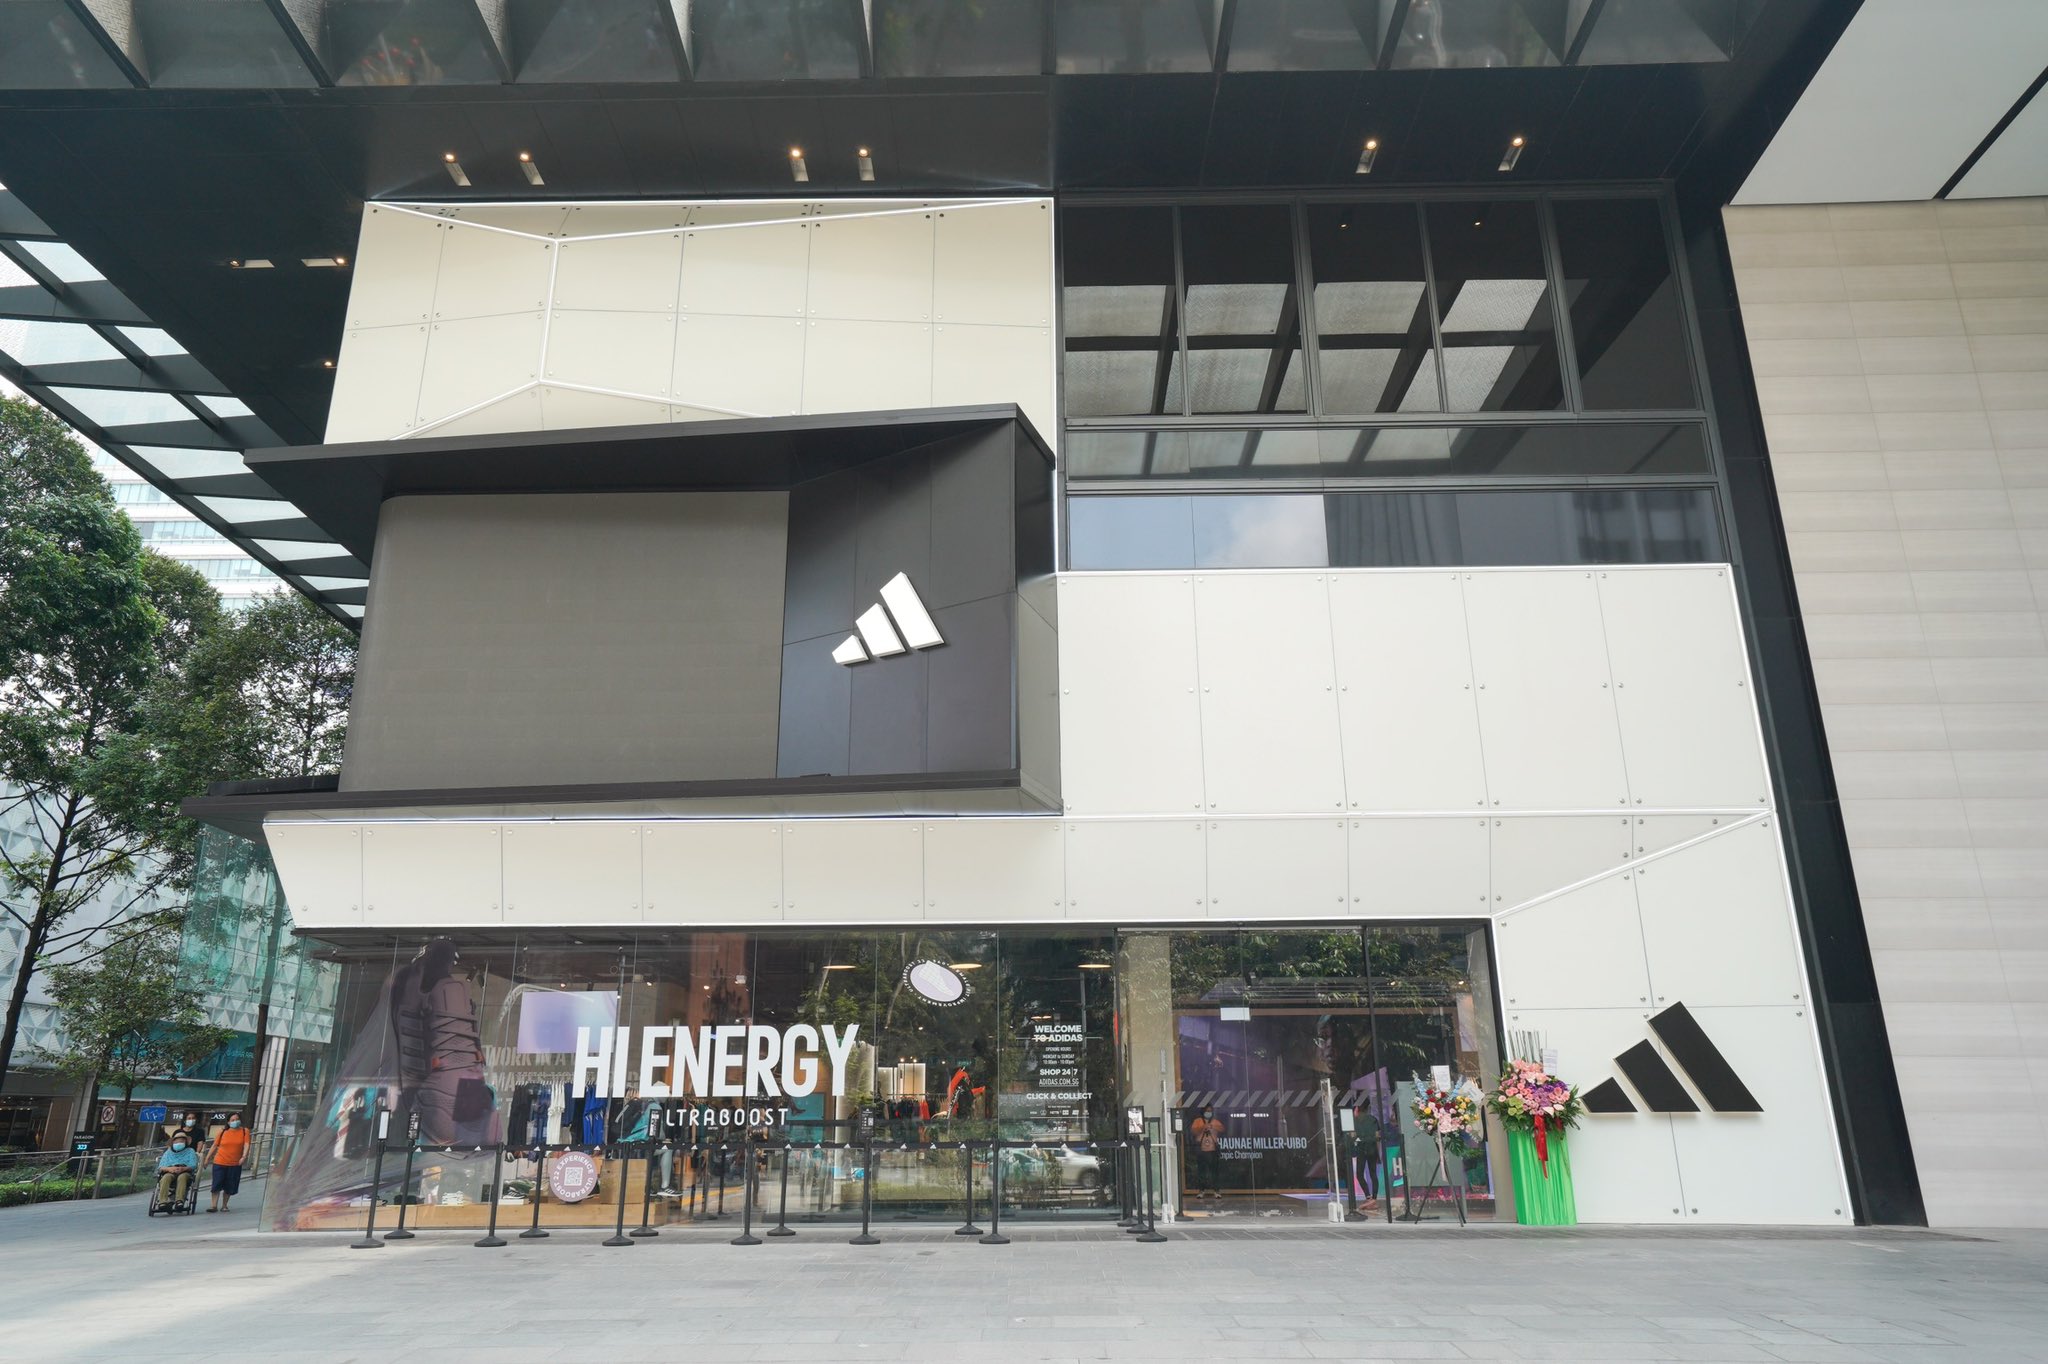 Lur on "New Adidas Brand Centre with 3 levels along Orchard Road where A&amp;F used to be https://t.co/GLnrTLnUWW" / Twitter